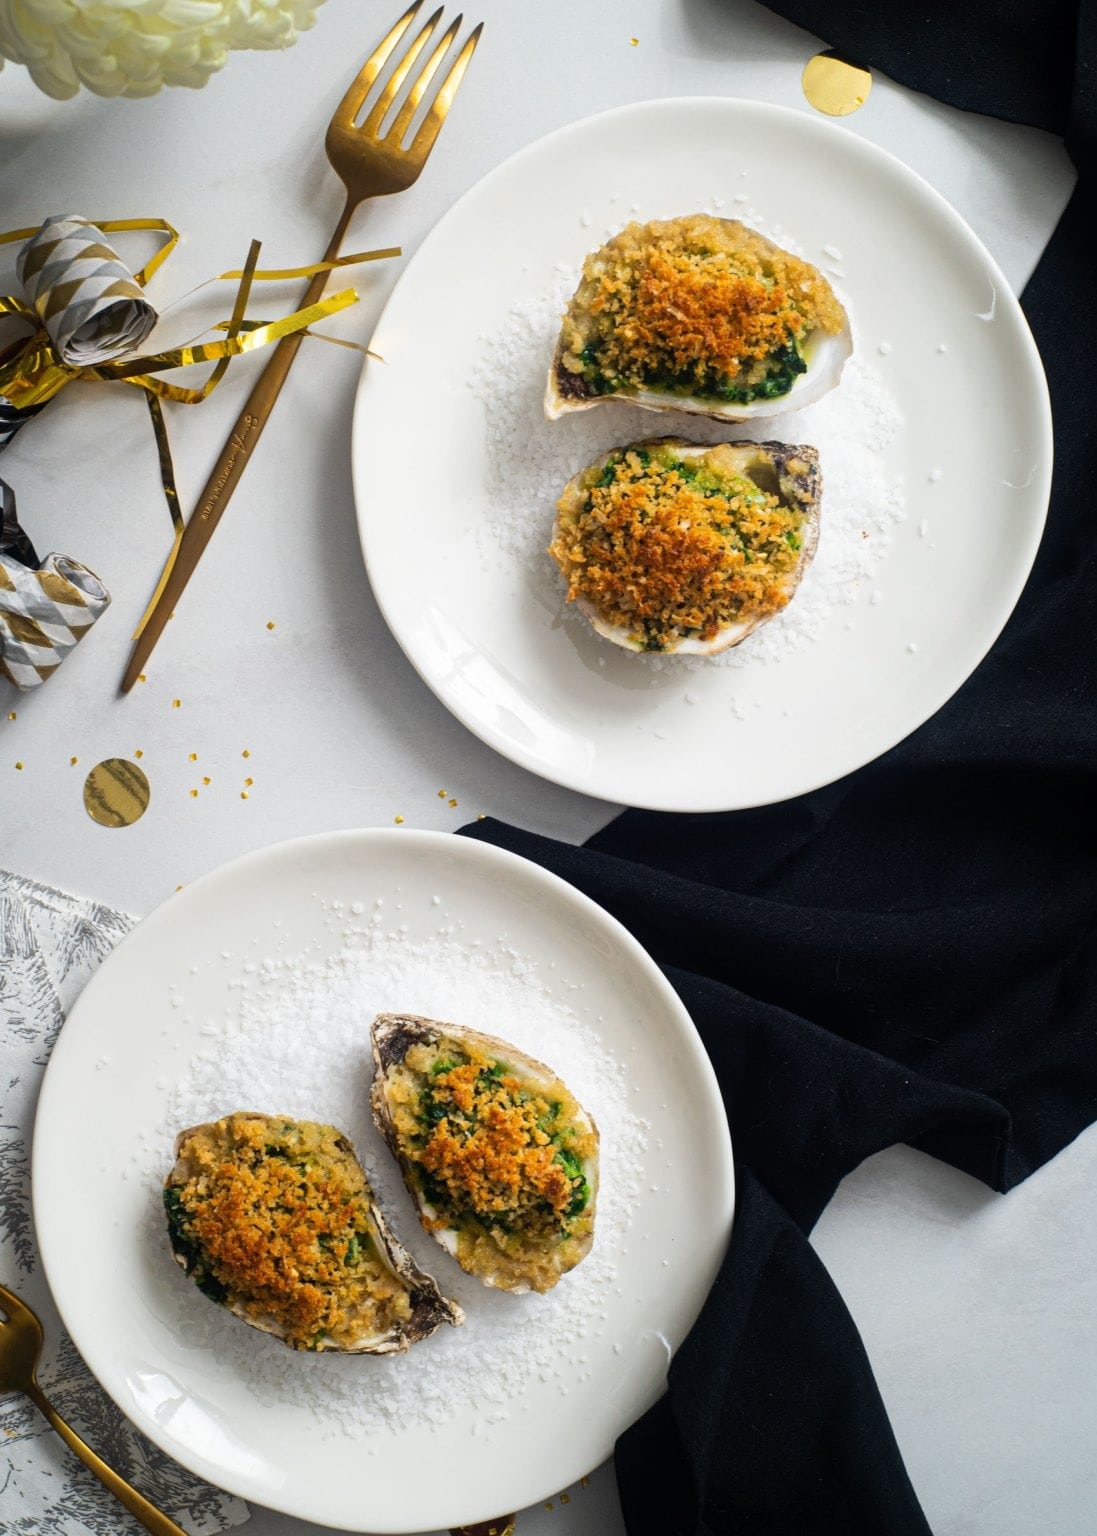 Servings for two baked oyster stuffed with spinach and crumbly toppings. 